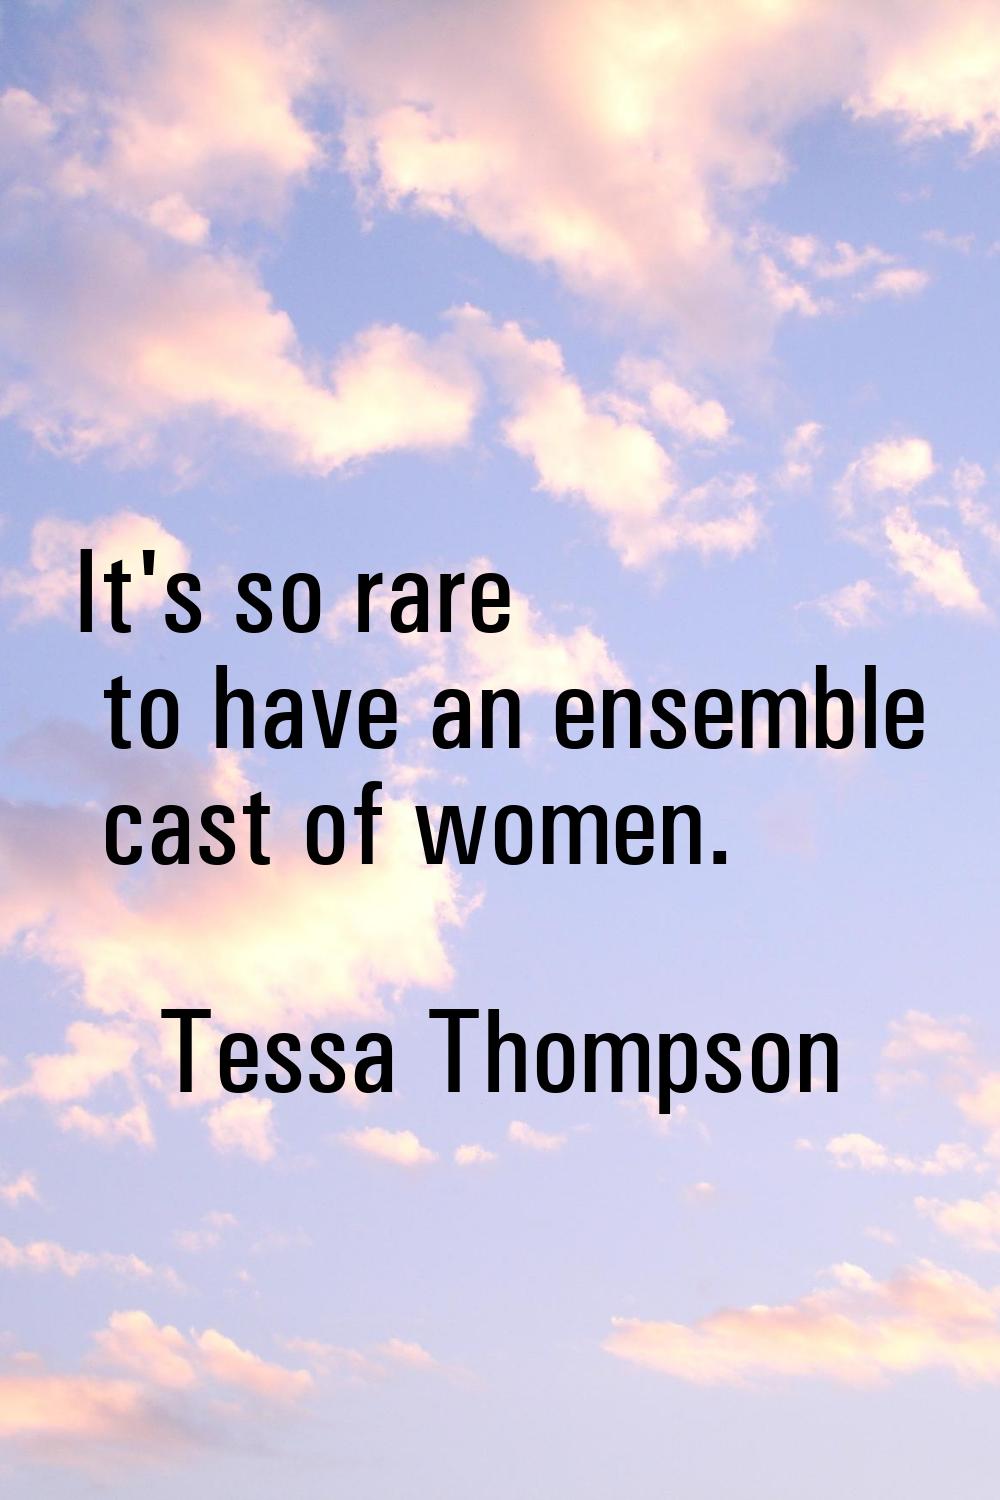 It's so rare to have an ensemble cast of women.